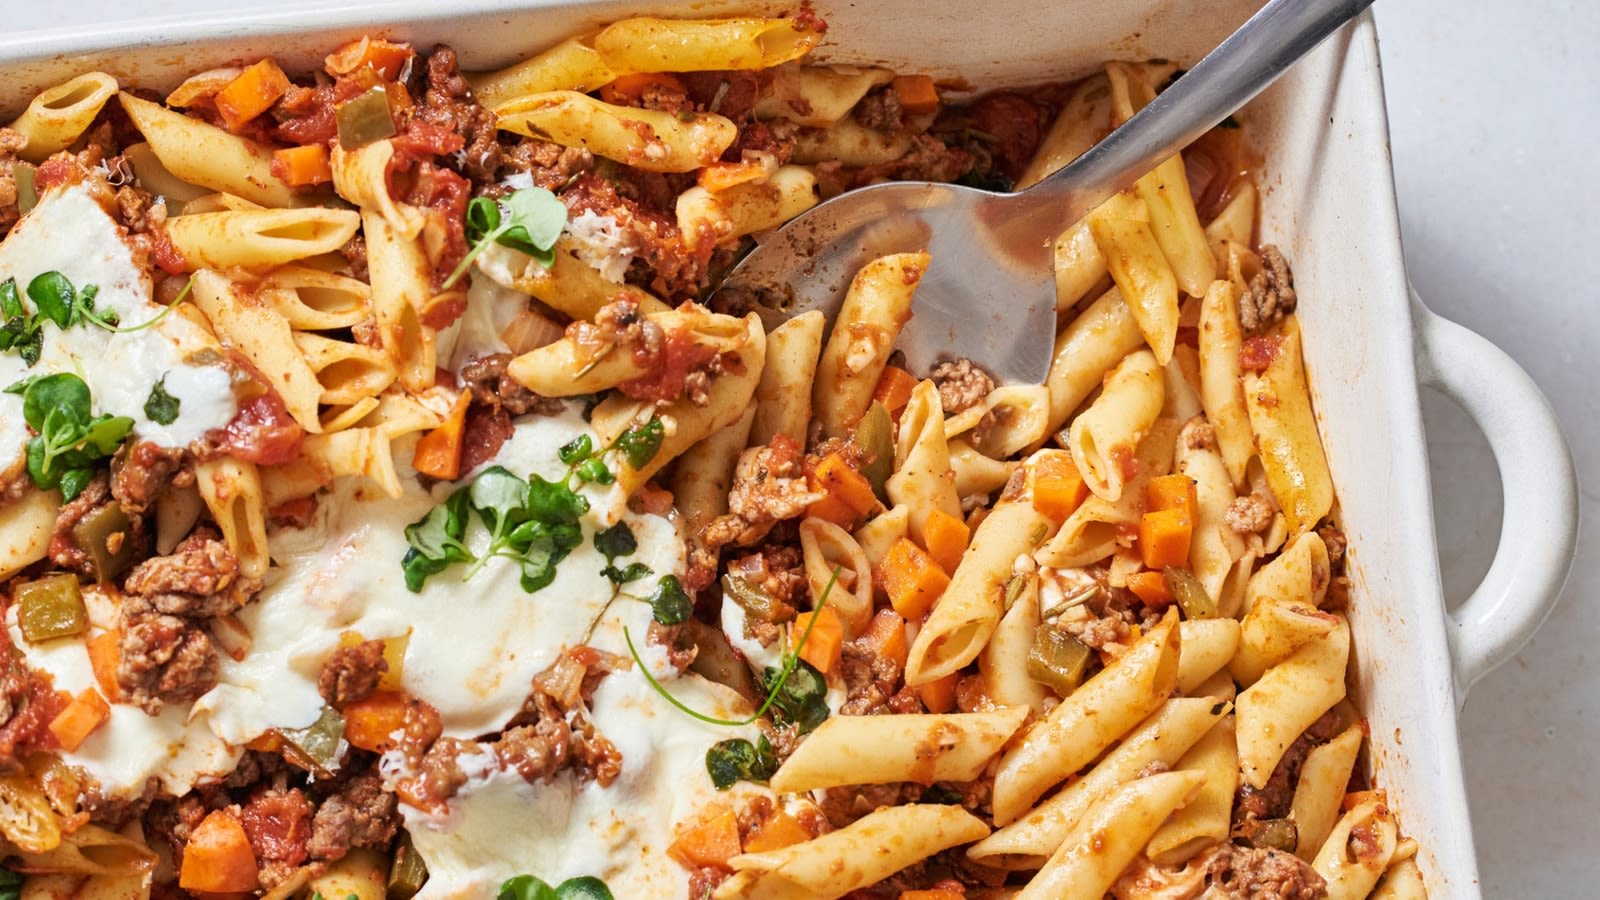 10 Easy Ground Beef Casserole Recipes To Whip Up For Dinner